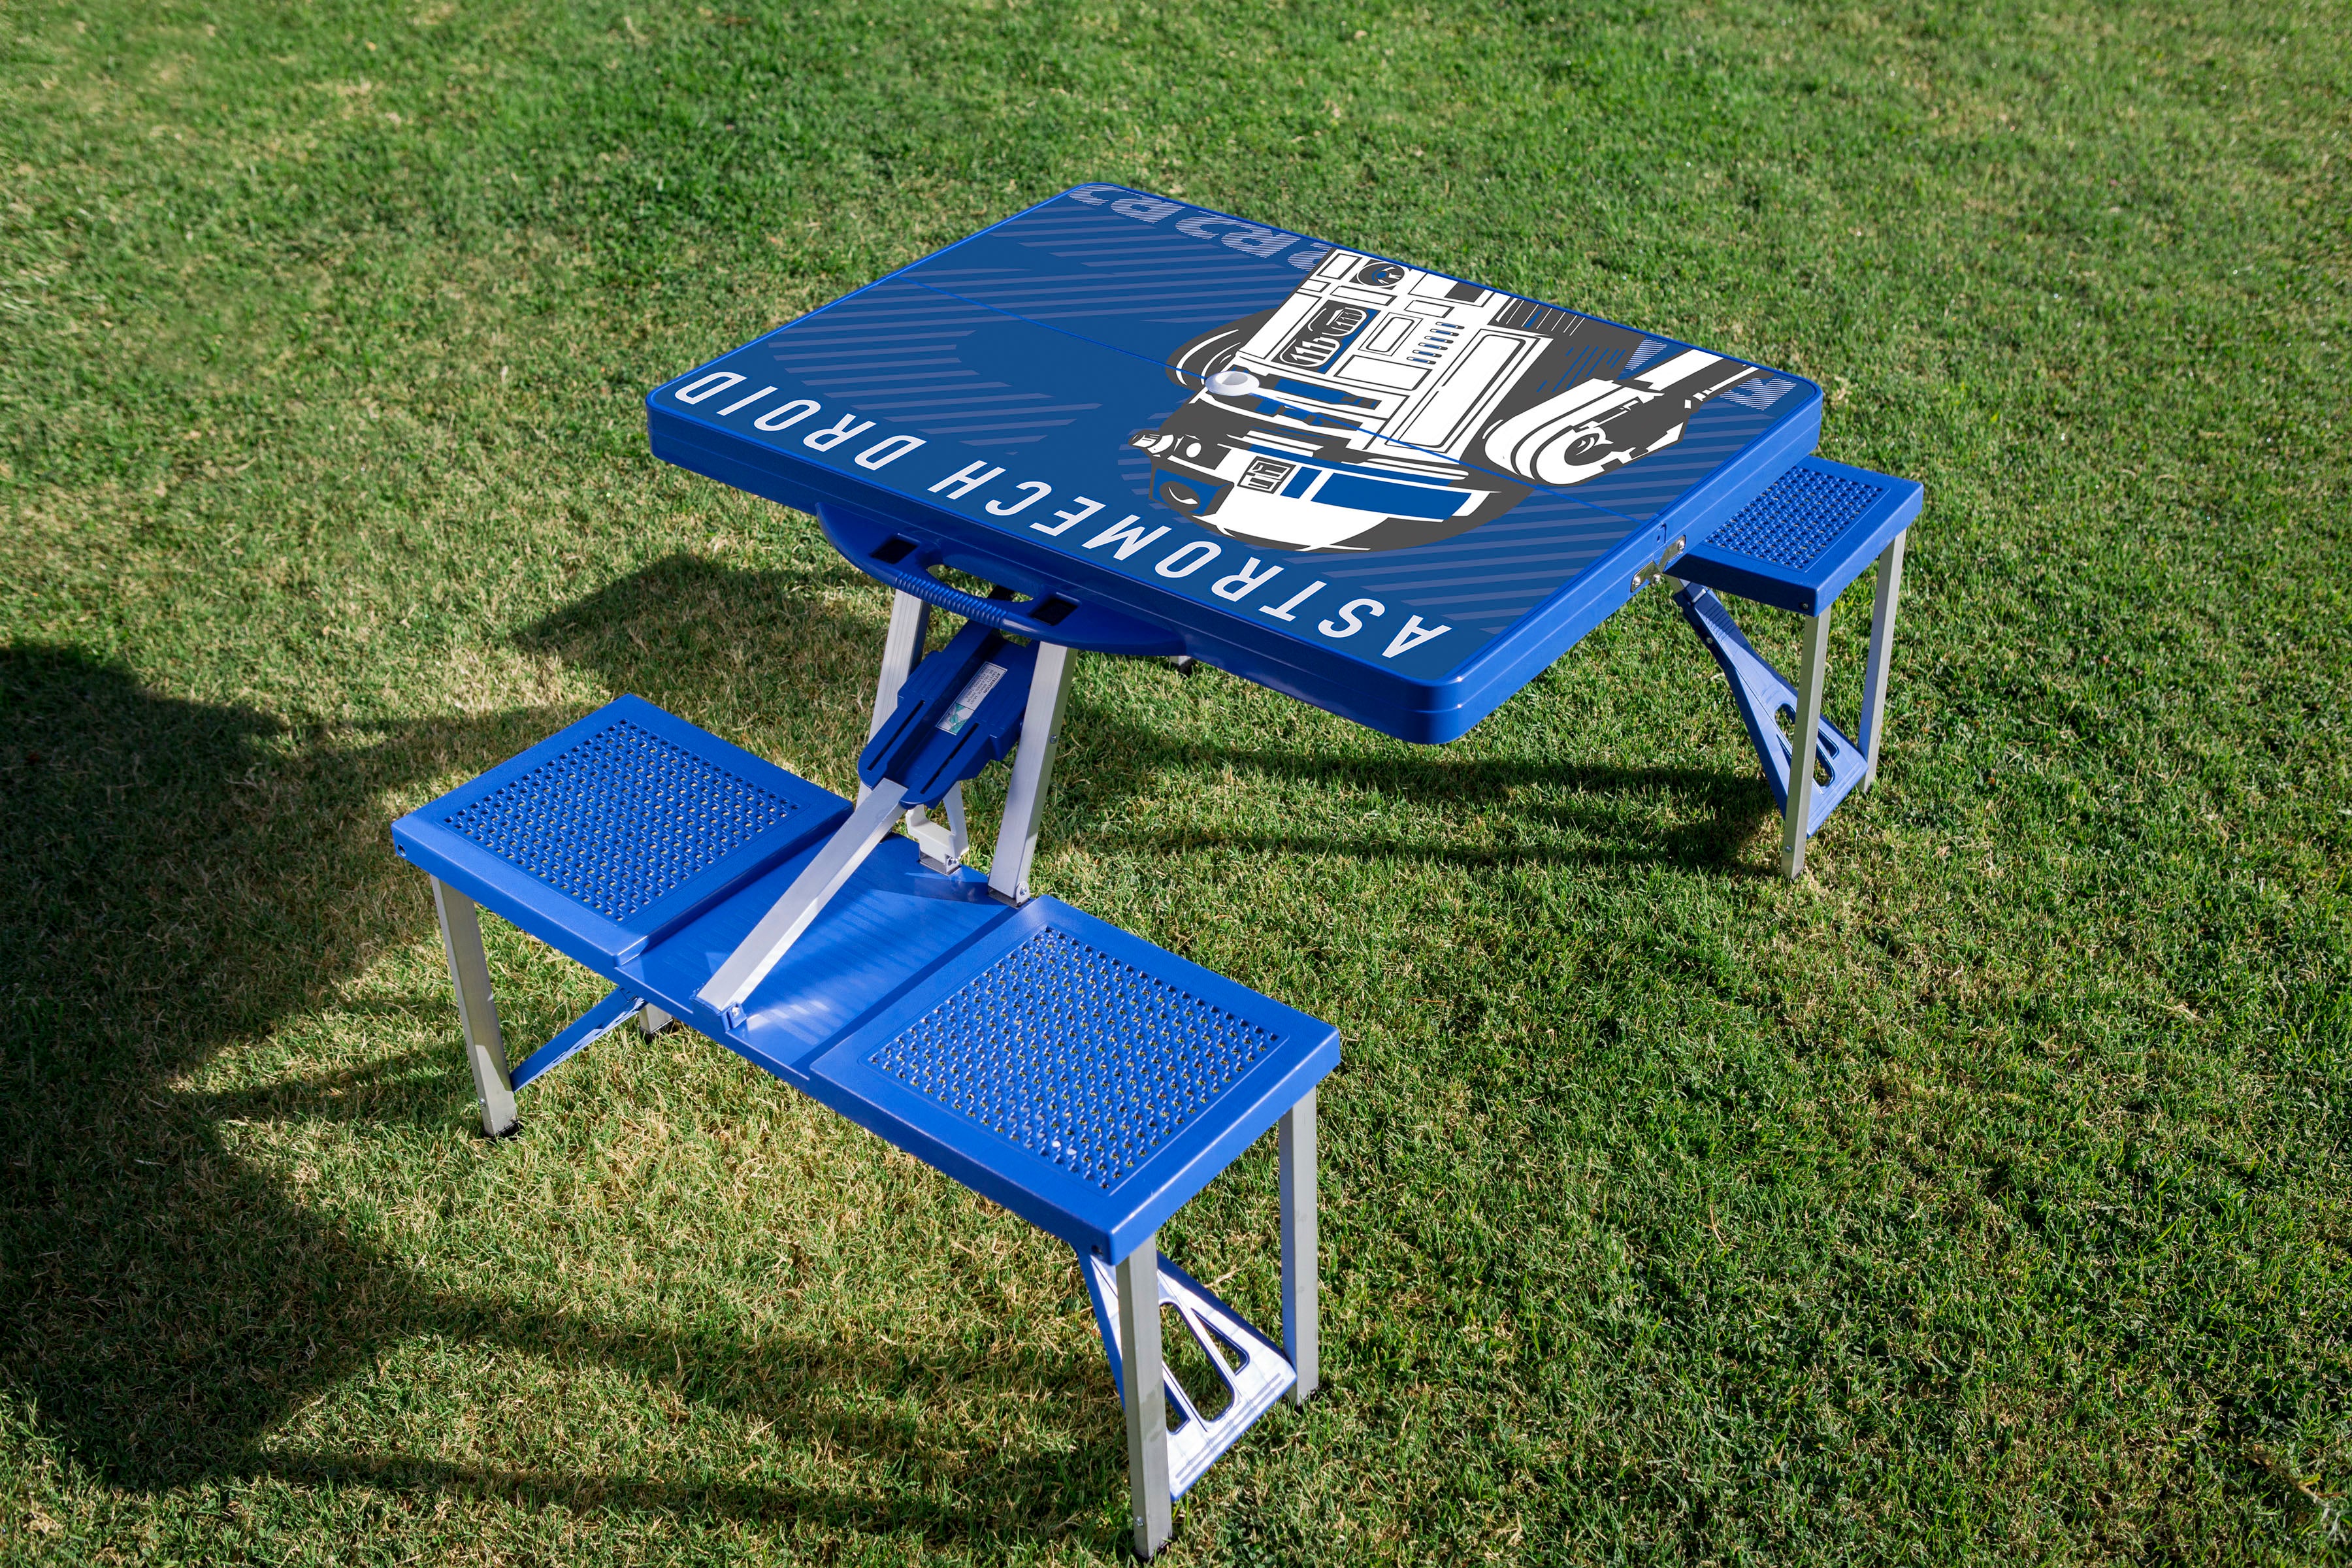 Star Wars Picnic Table Portable Folding Table With Seats